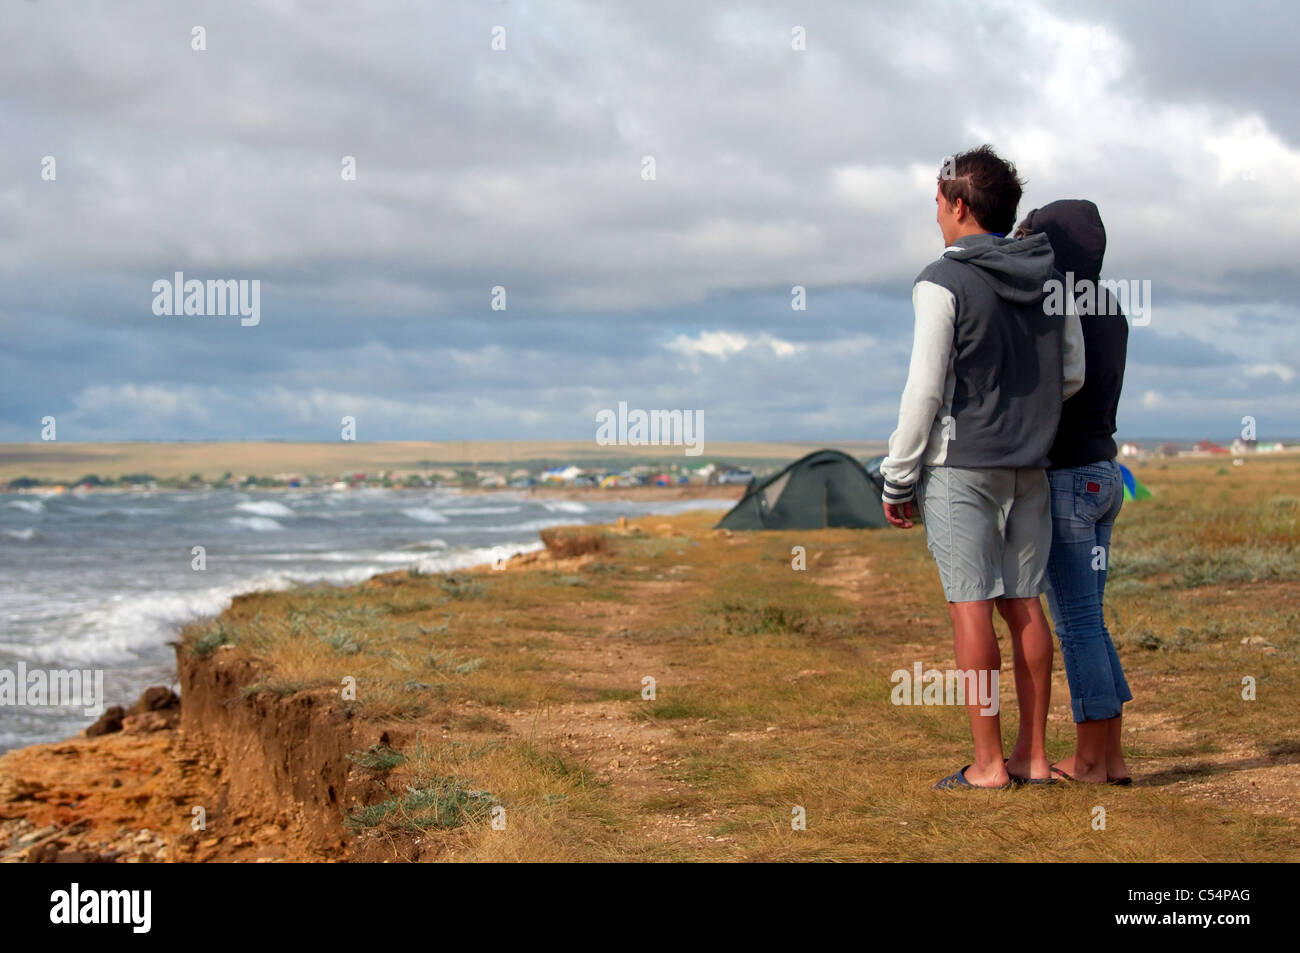 The young pair looks at a stormy sea Stock Photo